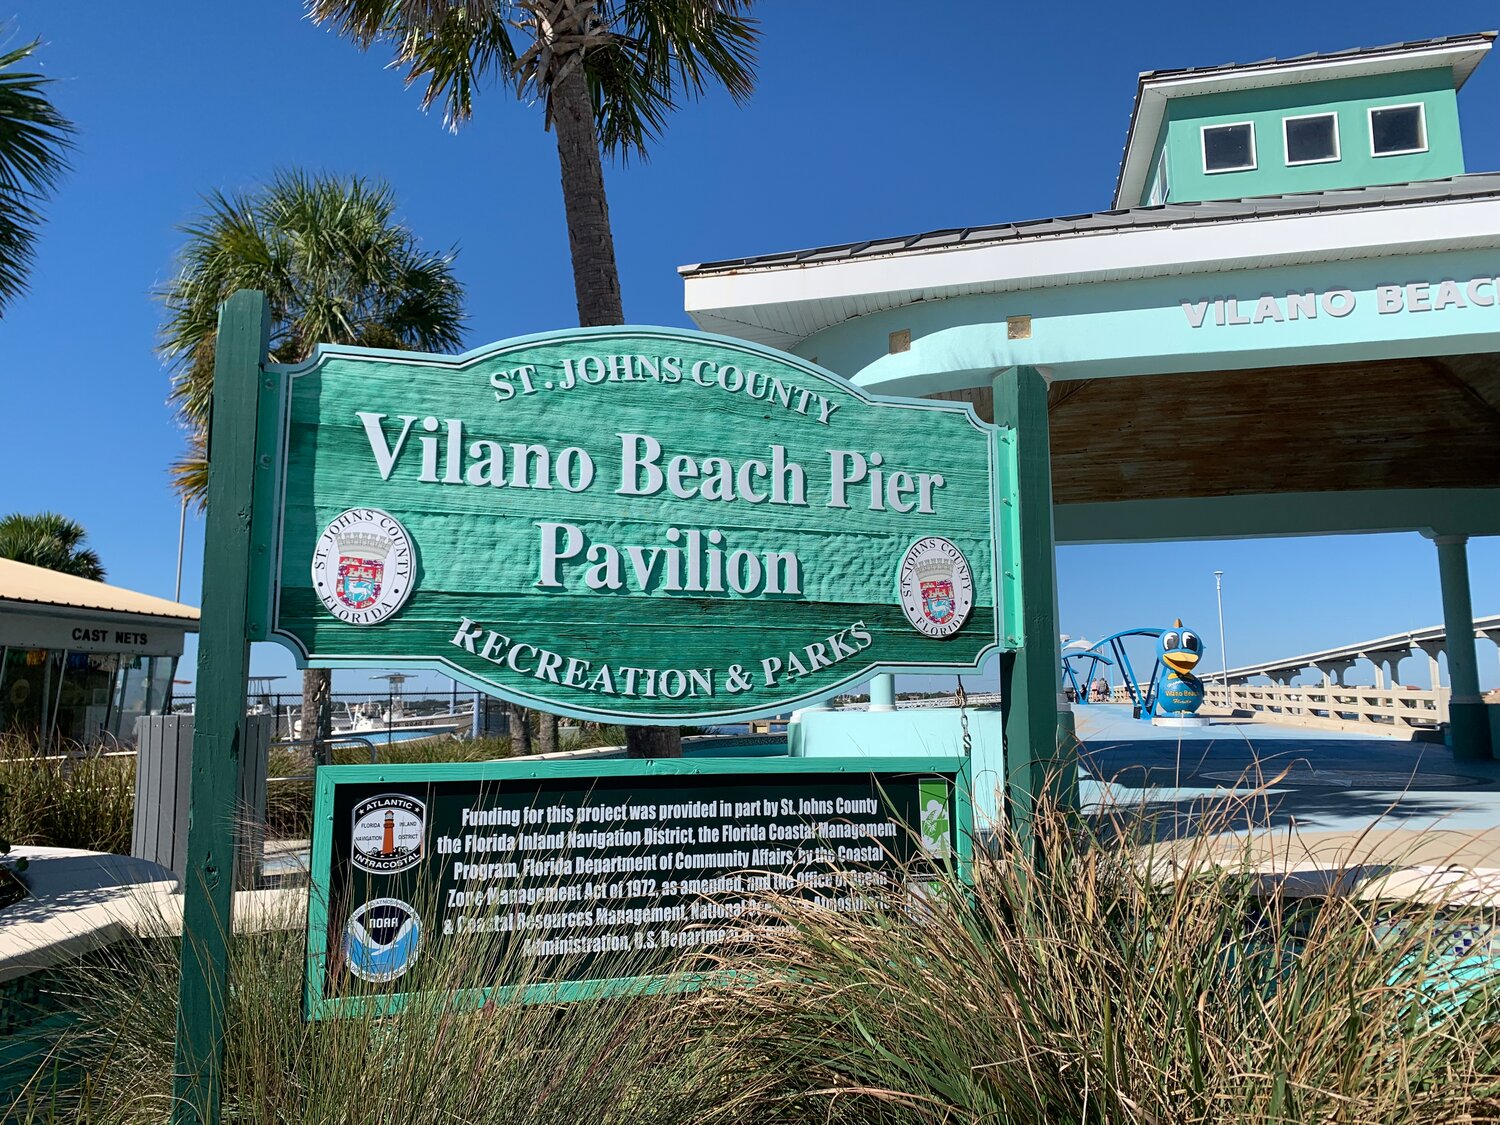 The event will attract many visitors to Vilano Beach.